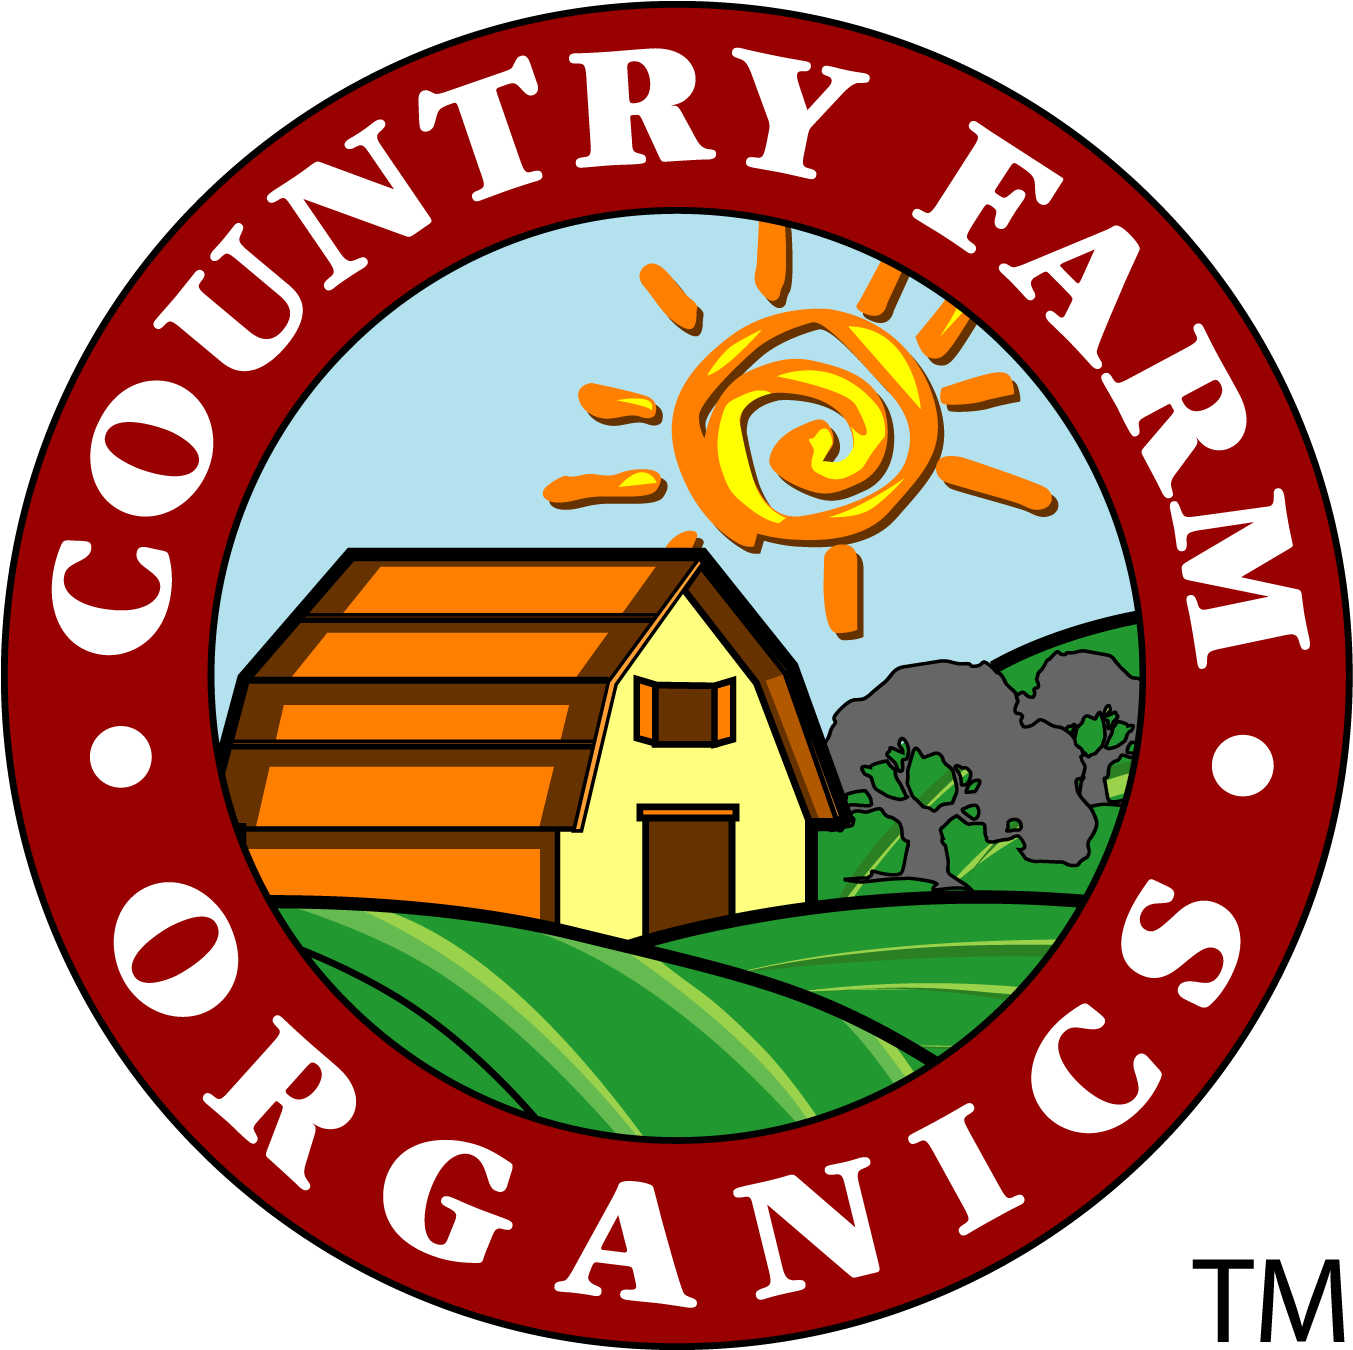 Country Farms Sdn Bhd Is A Wholly-owned Subsidiary - Country Farms Sdn Bhd (1352x1380)